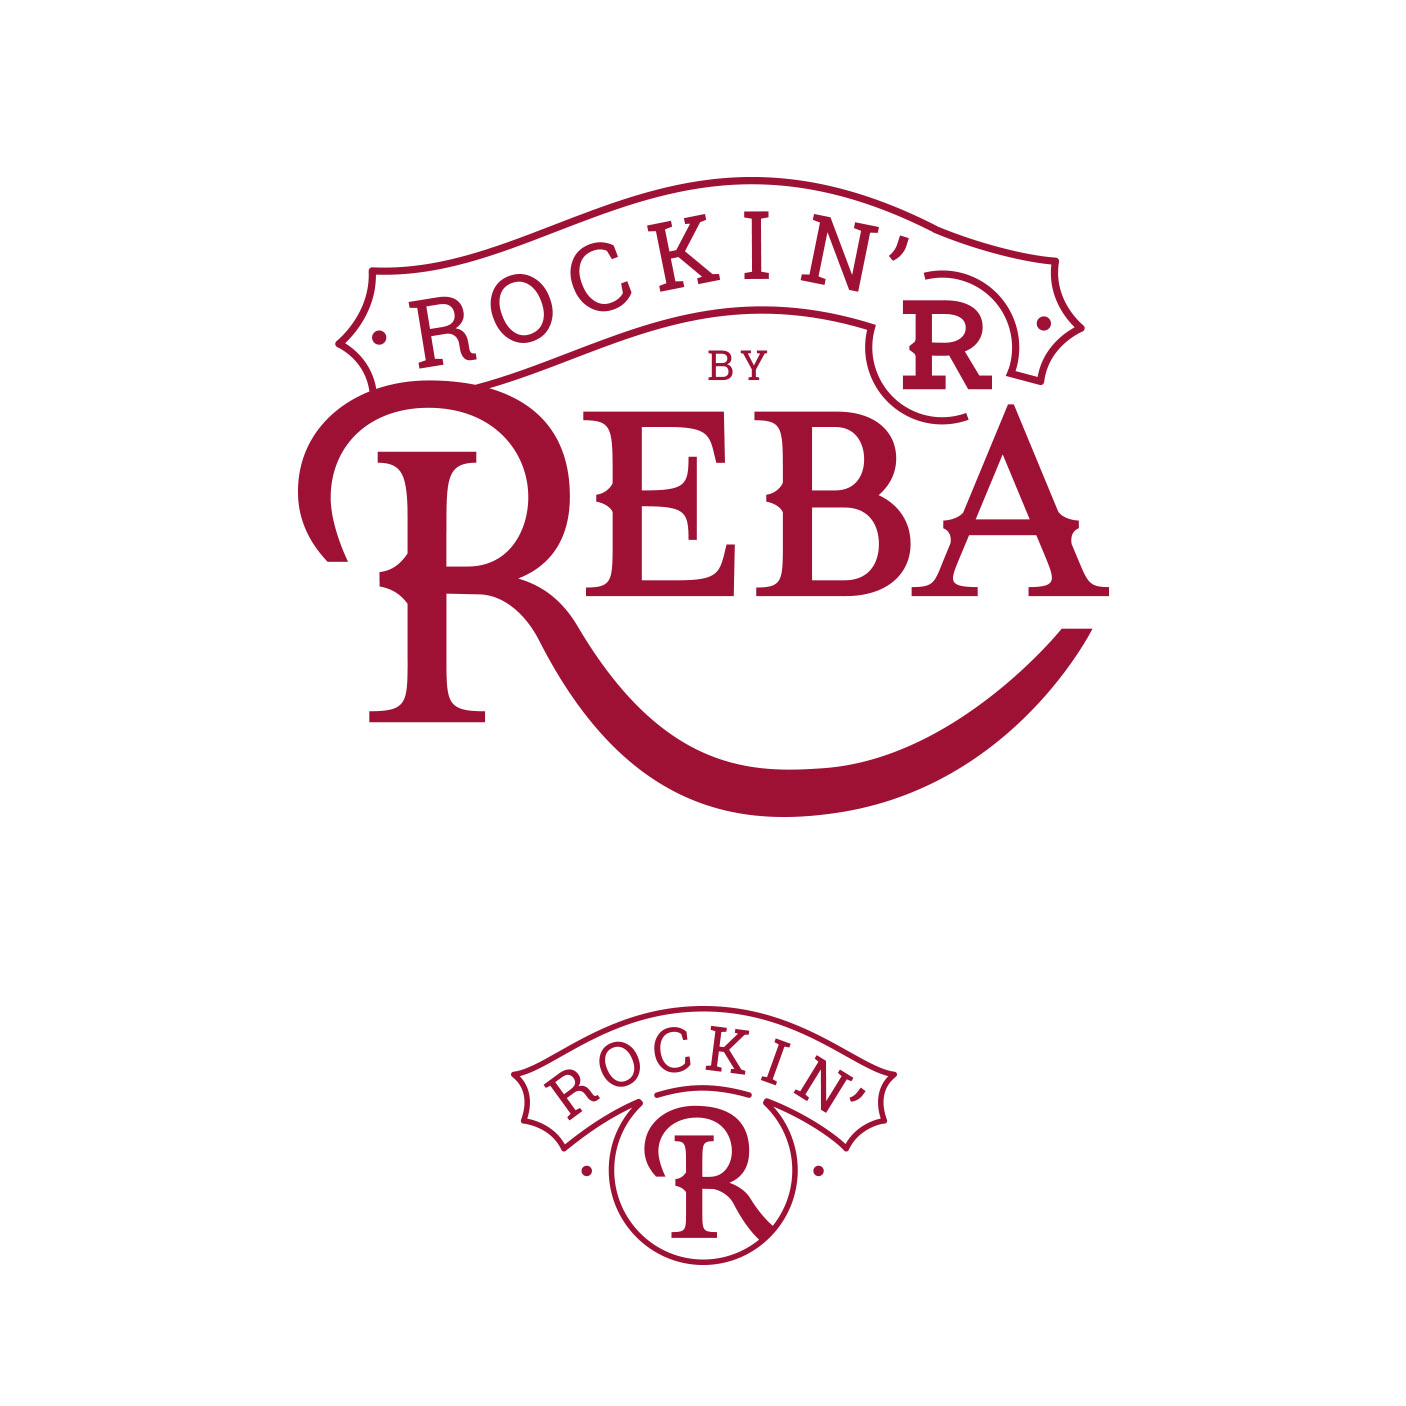 Full brand system for Reba McEntire's brand sold exclusively at Cracker Barrel.